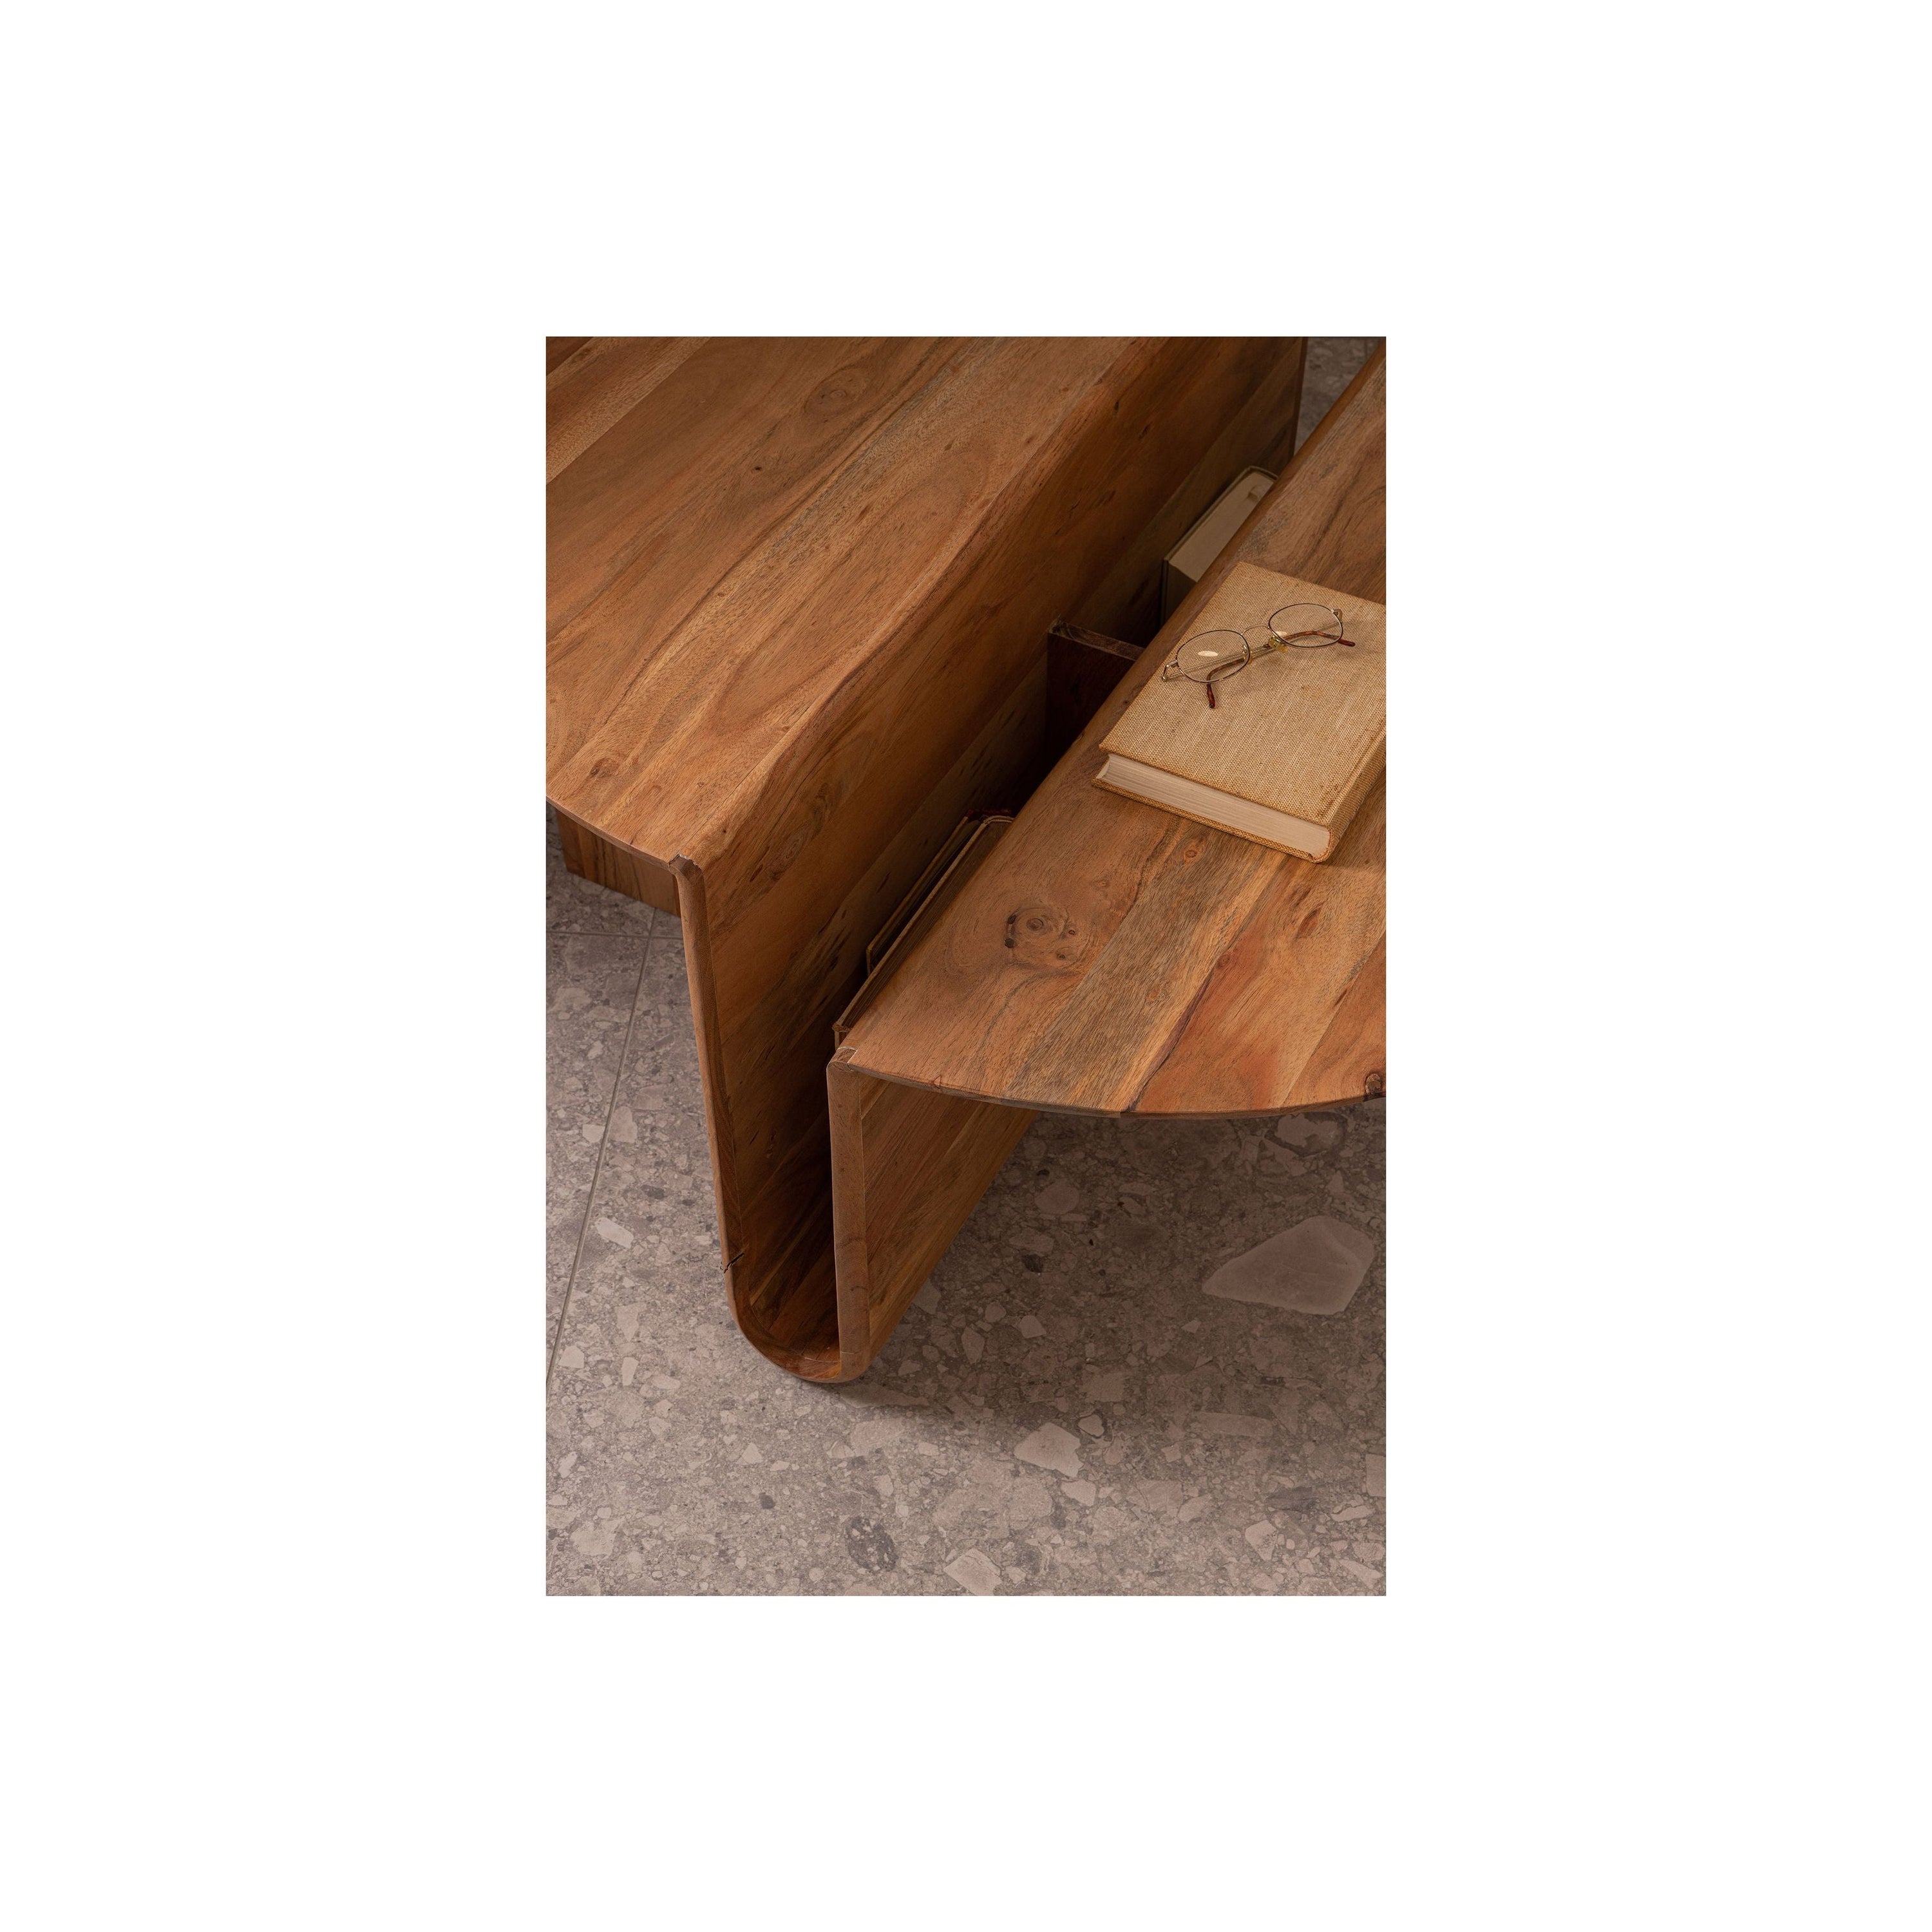 Jaws Coffee Table Wood Natural